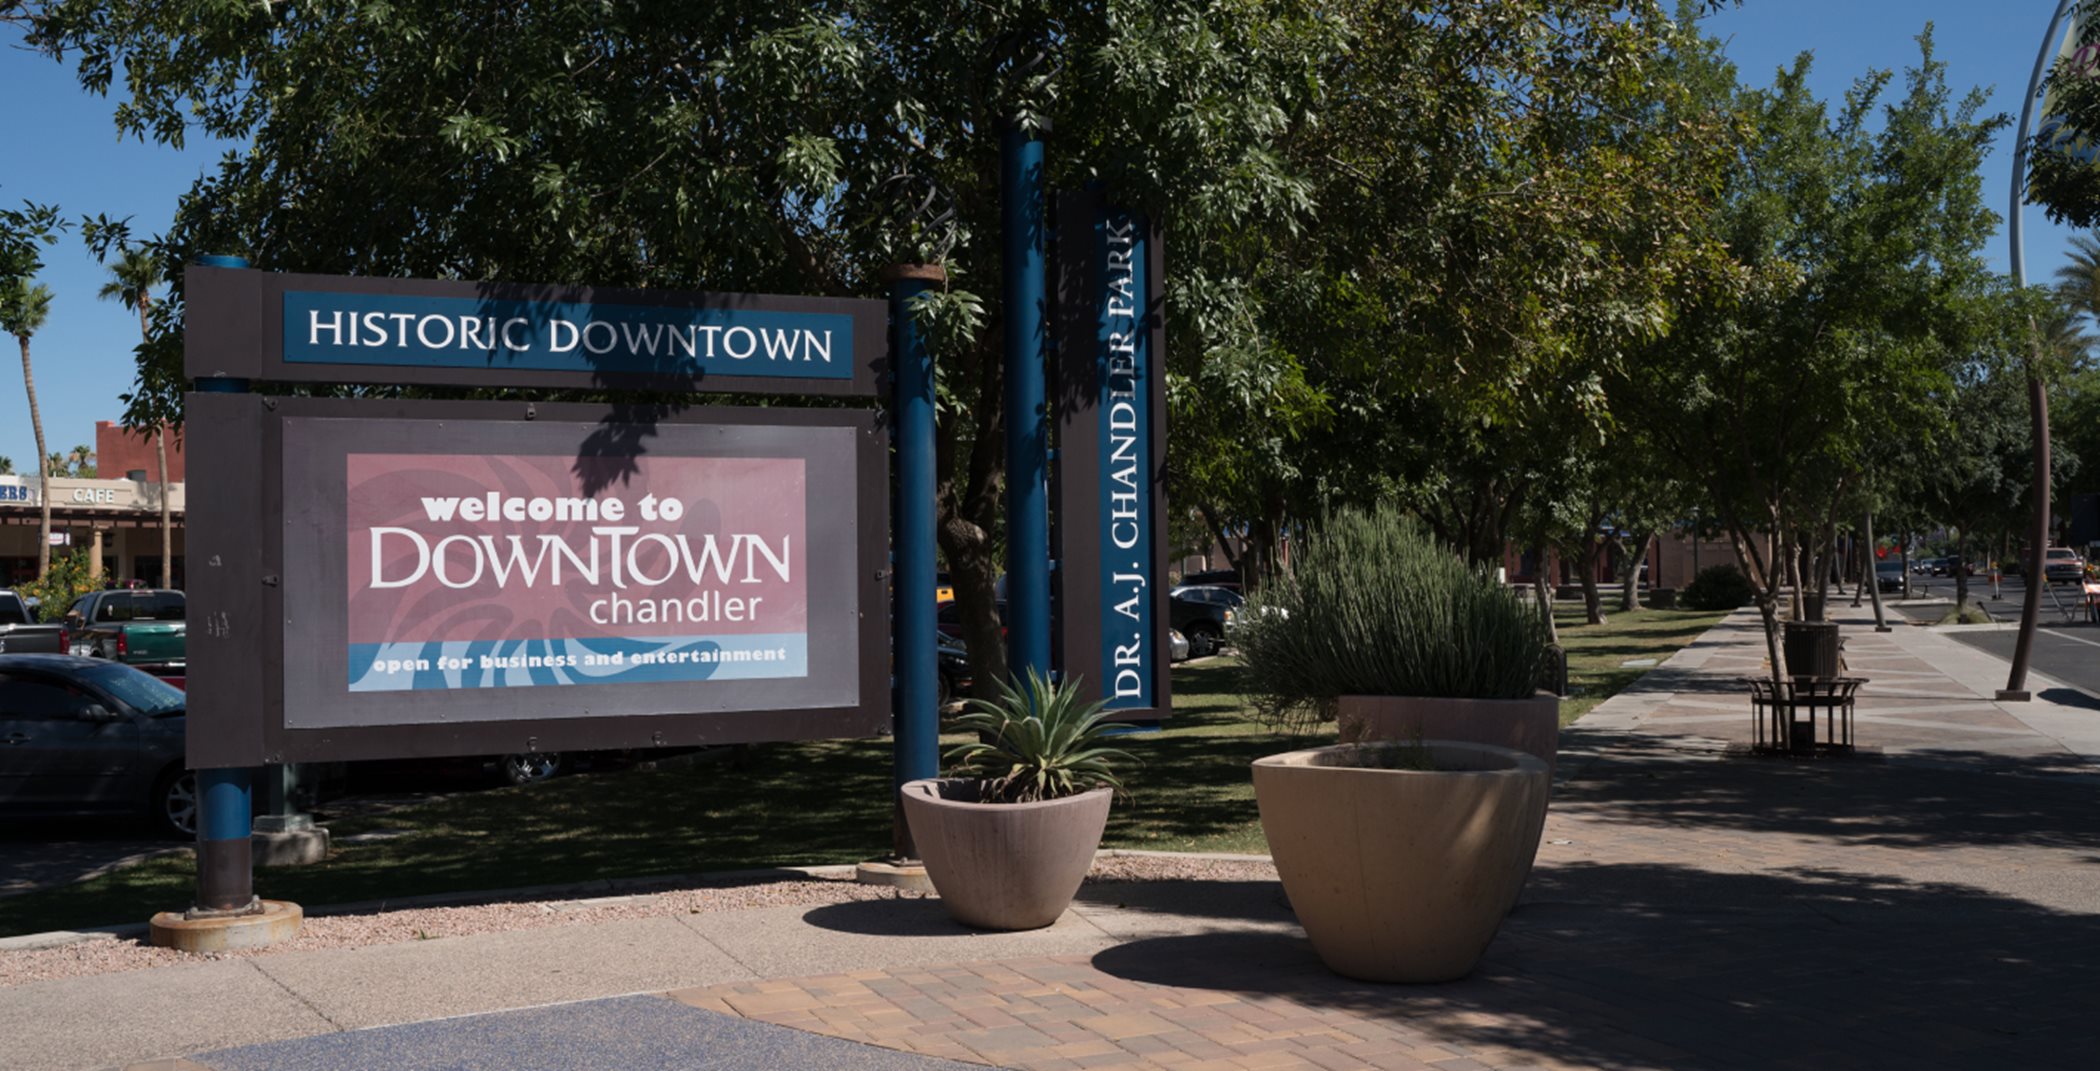 Welcome sign for downtown chandler